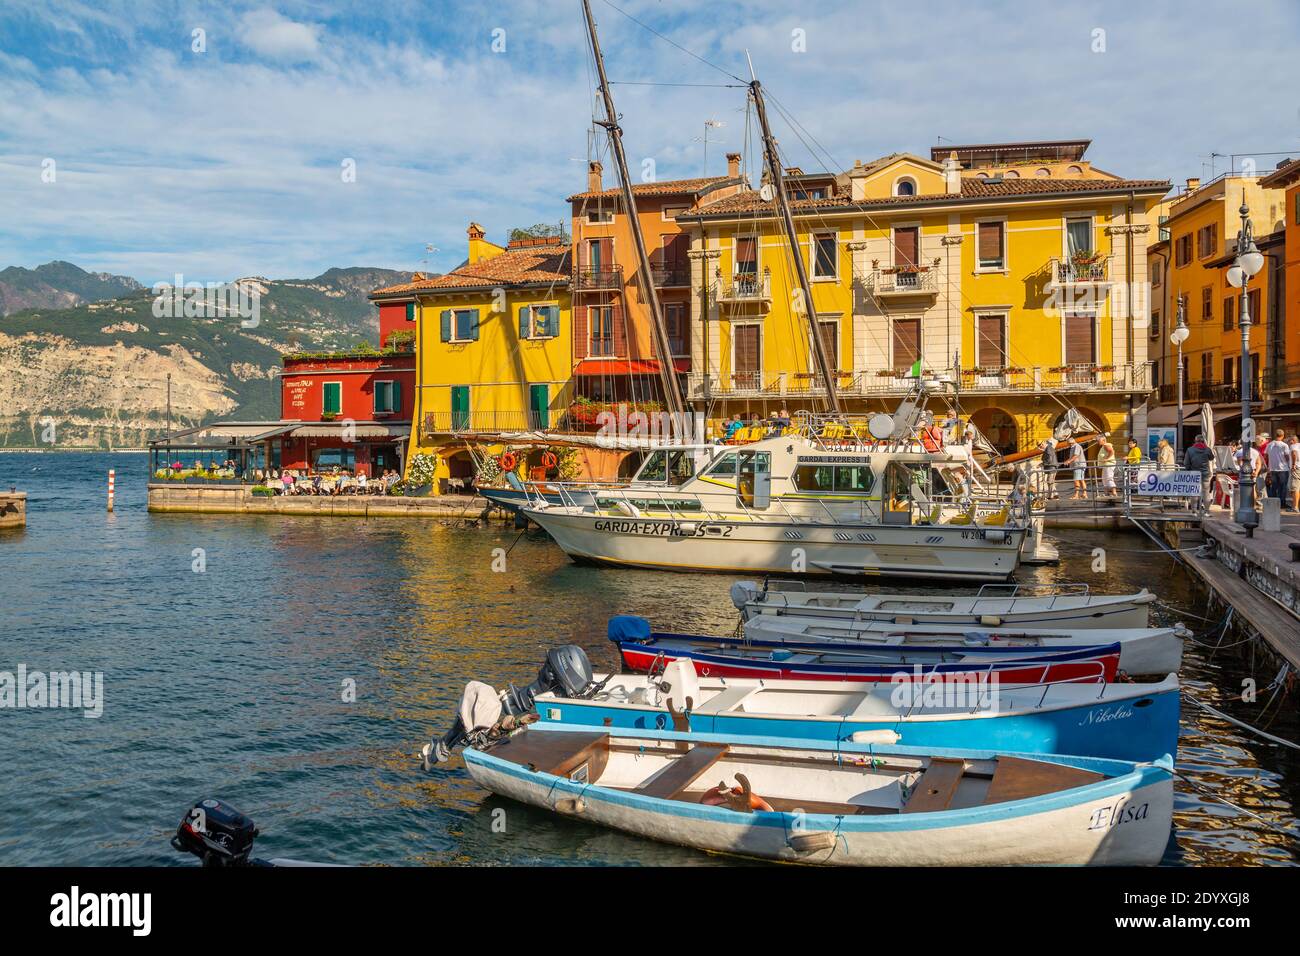 View of harbour and architecture on a sunny day, Malcesine, Lake Garda, Province of Verona, Italy, Europe Stock Photo